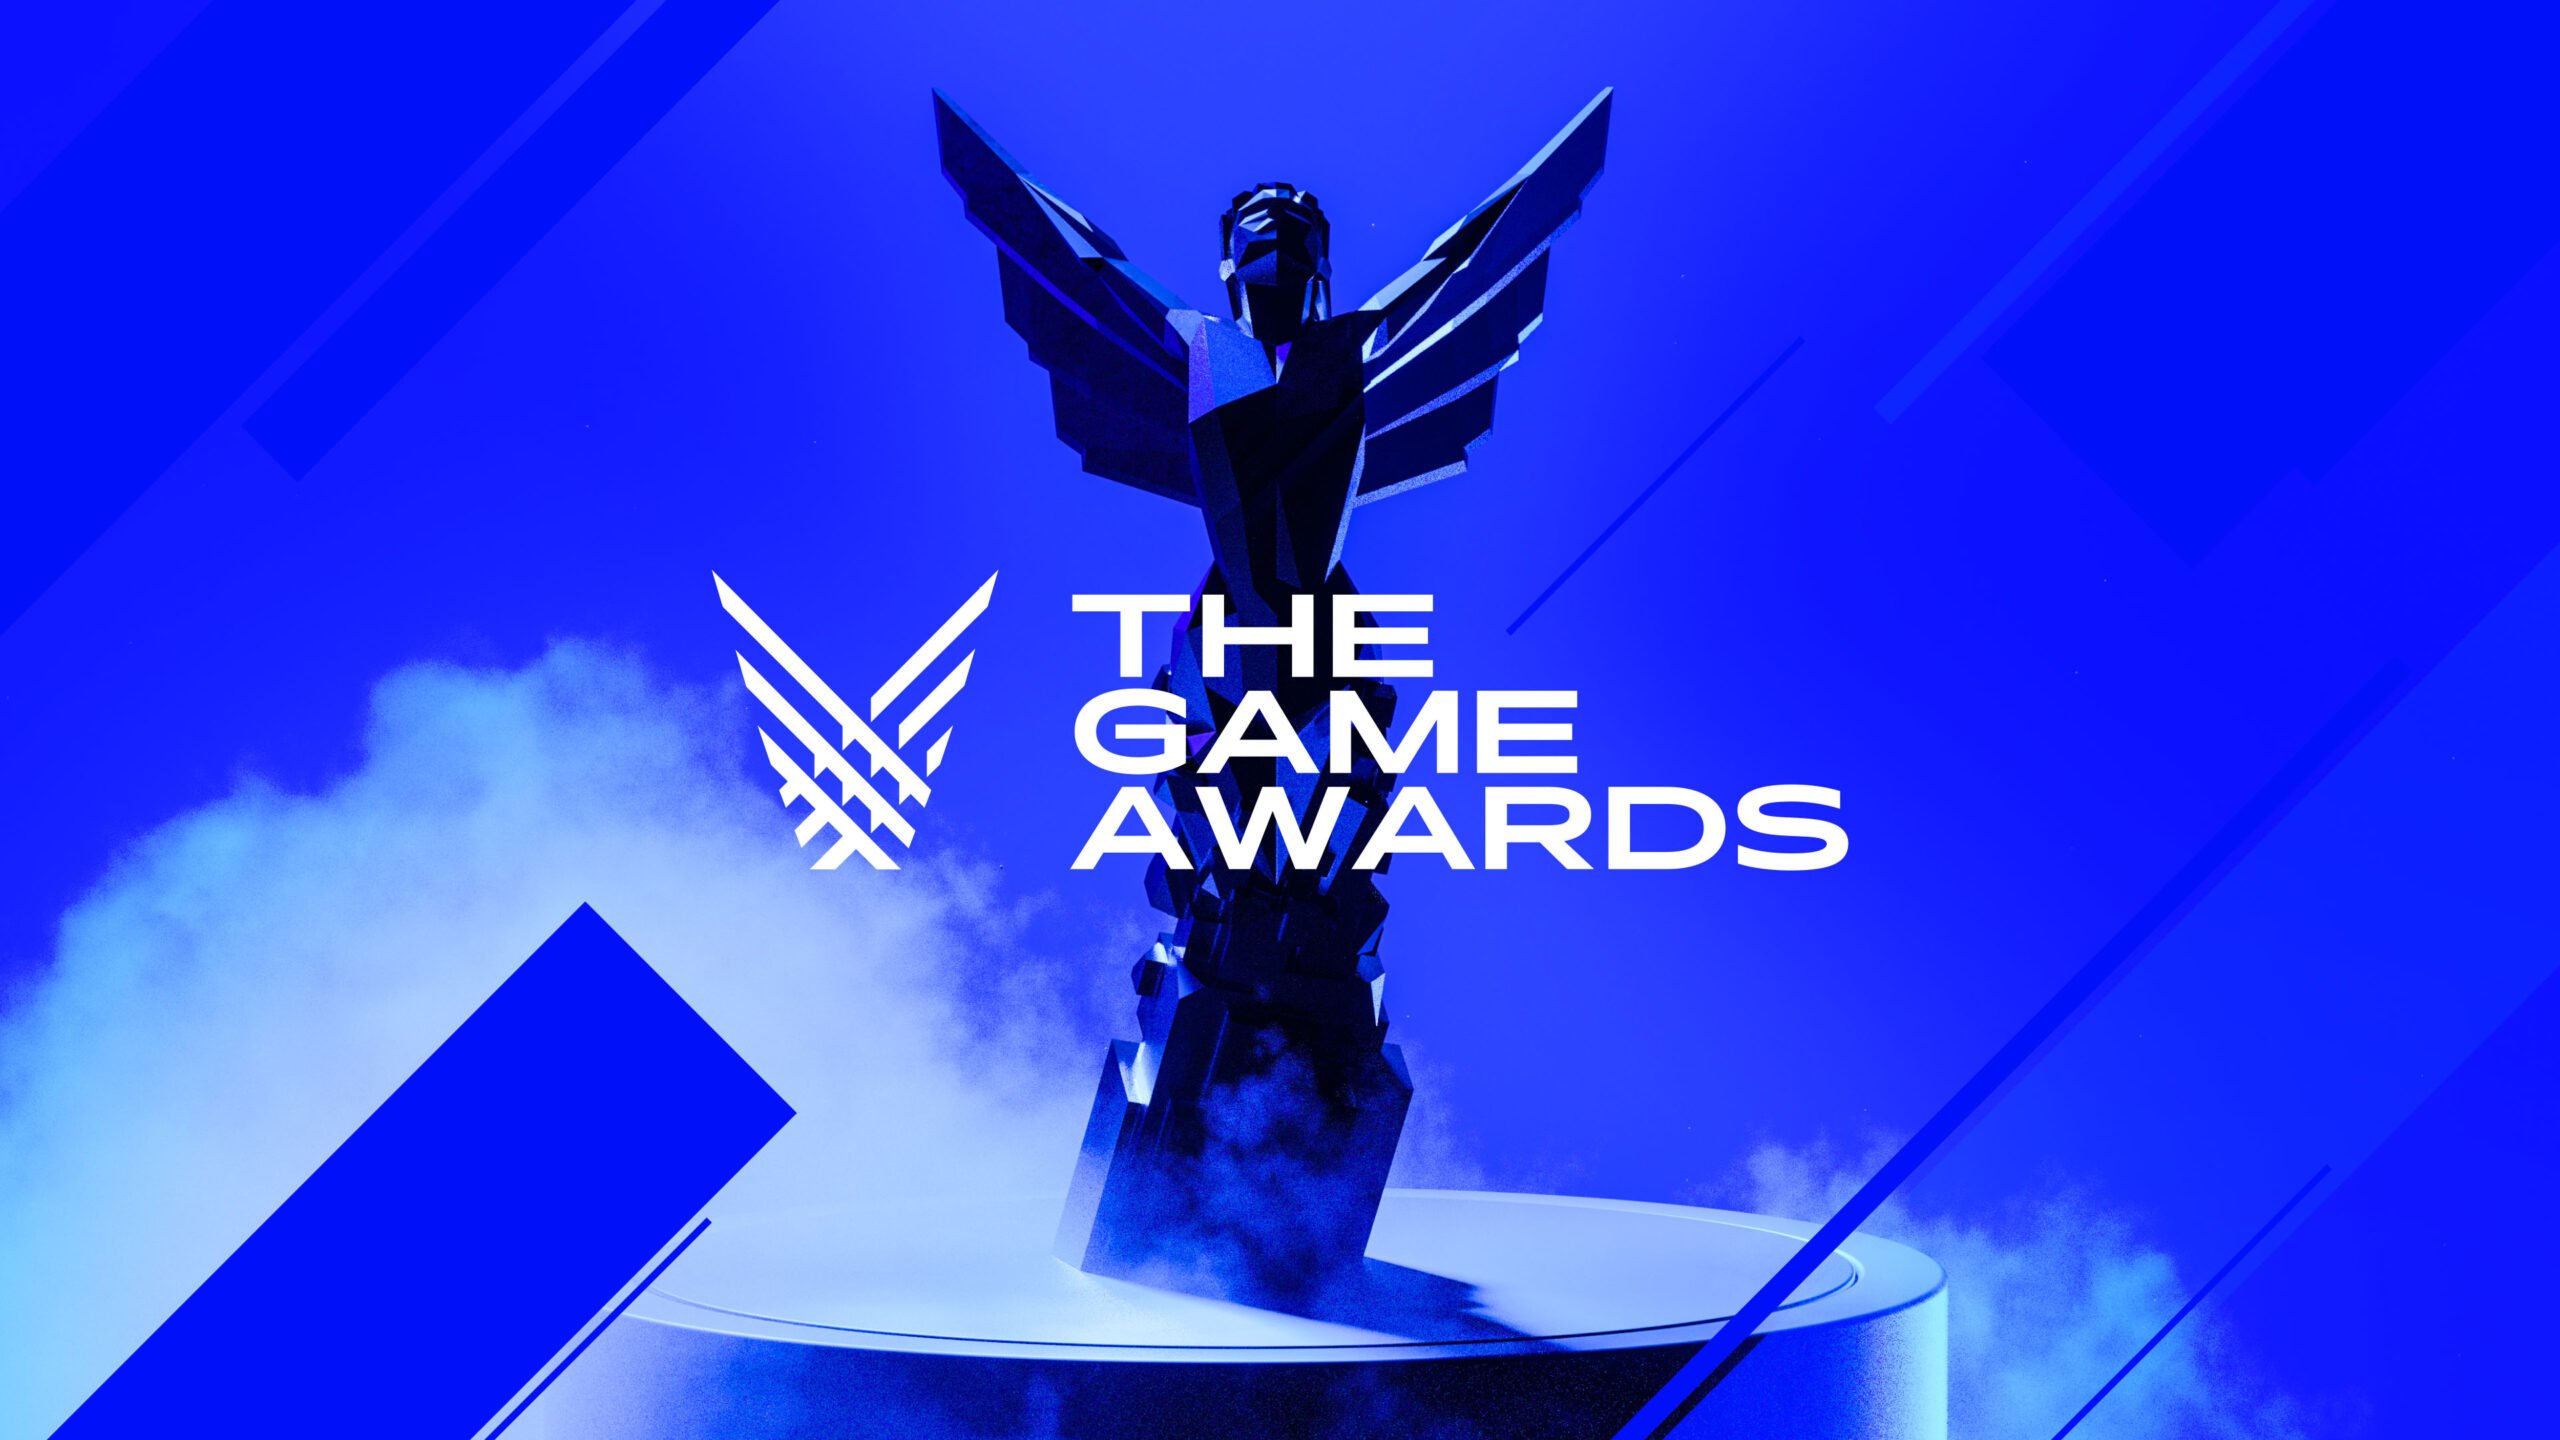 All Of The Game Awards 2023 GOTY Nominees Minus Starfield